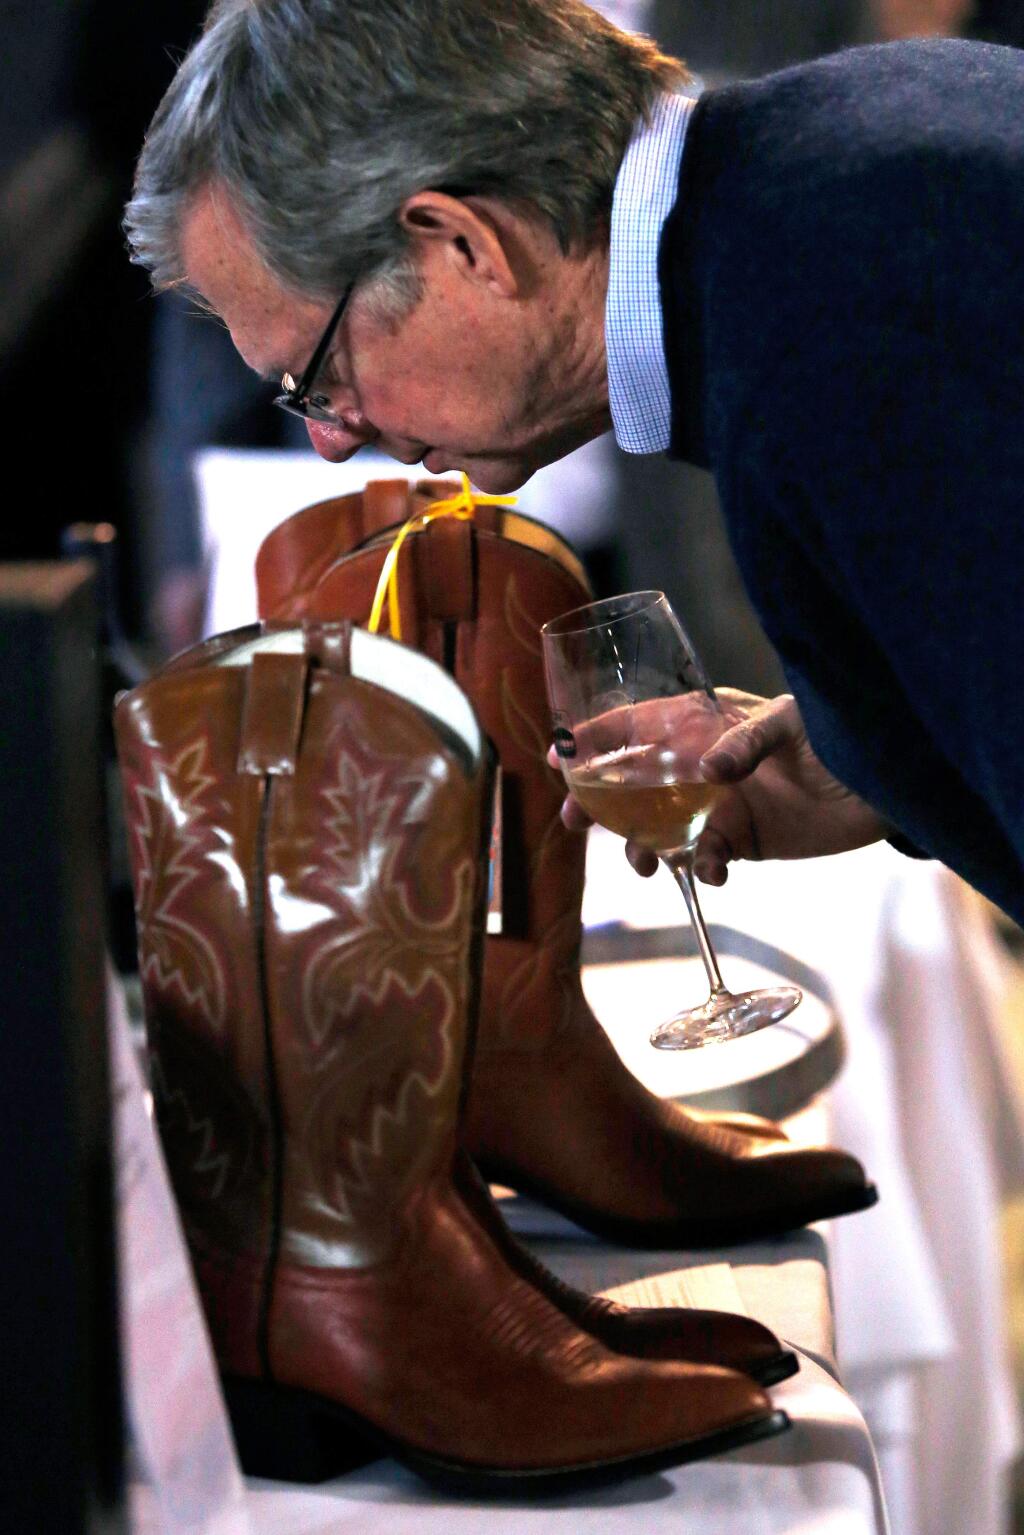 Tom Croft examines a pair of cowboy boots that he bid on in the silent auction during the SRJC AgTrust AgStravaganza, honoring vintners John and Terri Balletto, at Shone Farm in Forestville, California on Saturday, November 5, 2016. (Alvin Jornada / The Press Democrat)